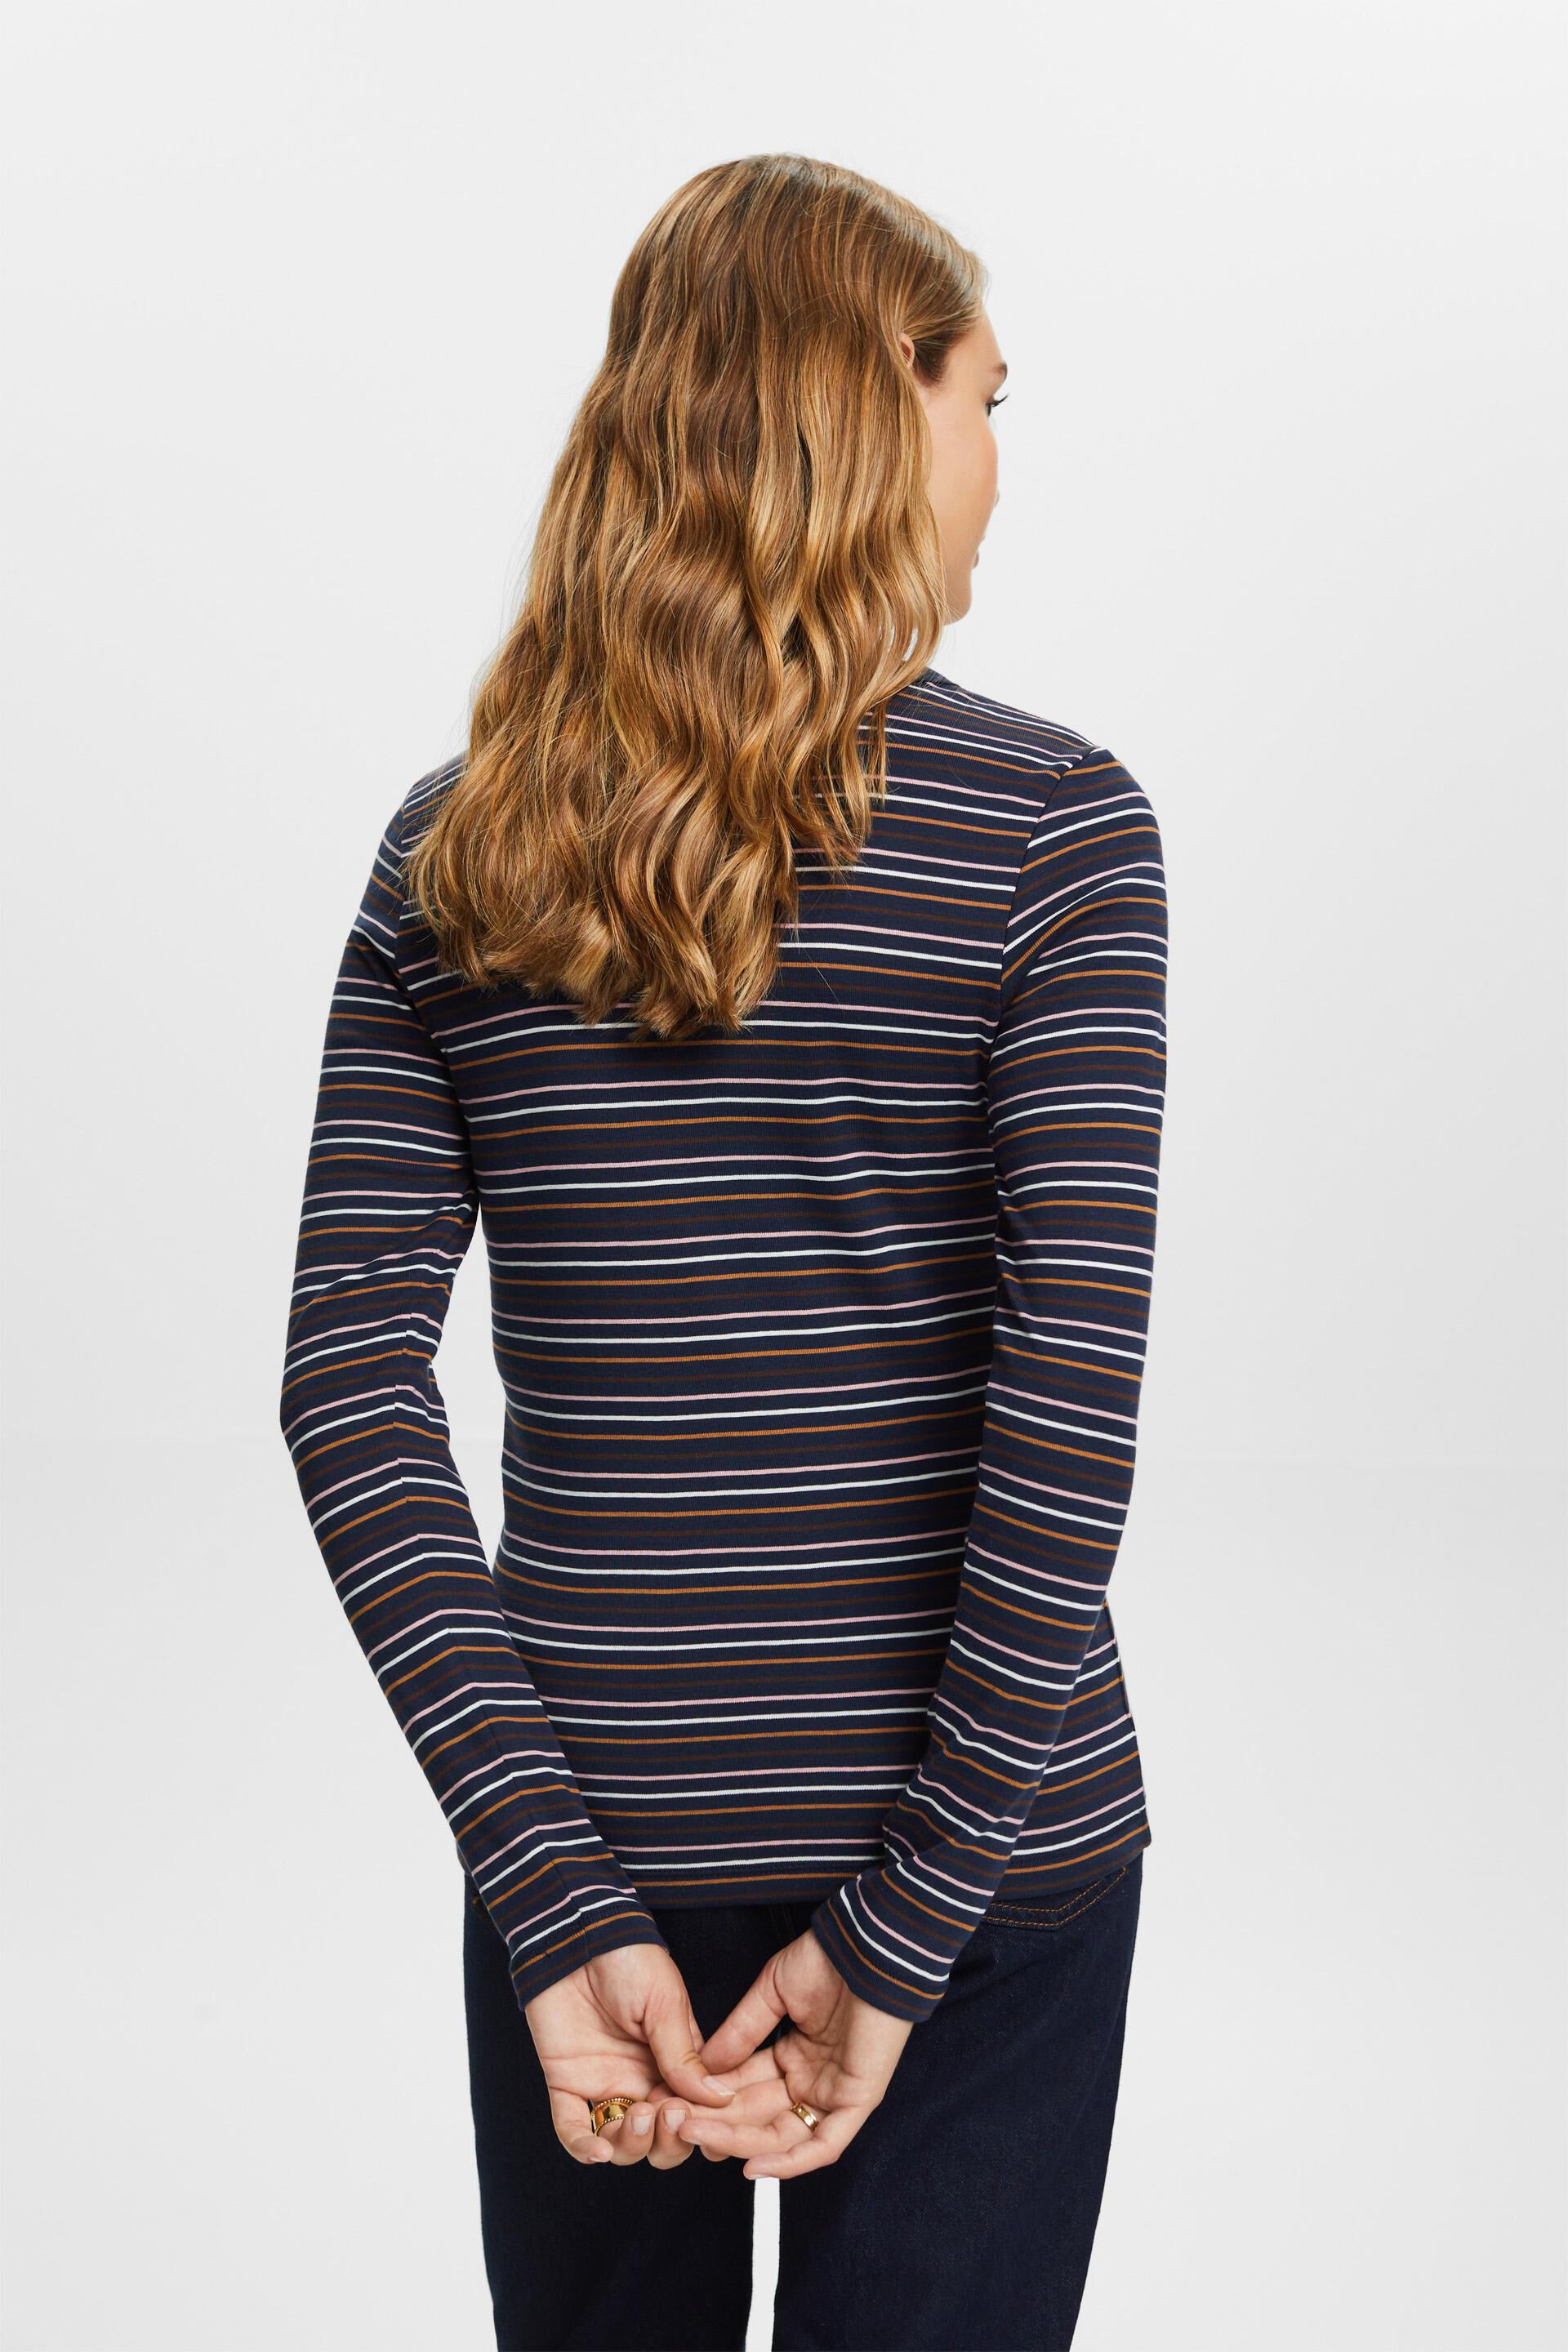 ESPRIT - Striped long sleeve top, organic cotton at our Online Shop